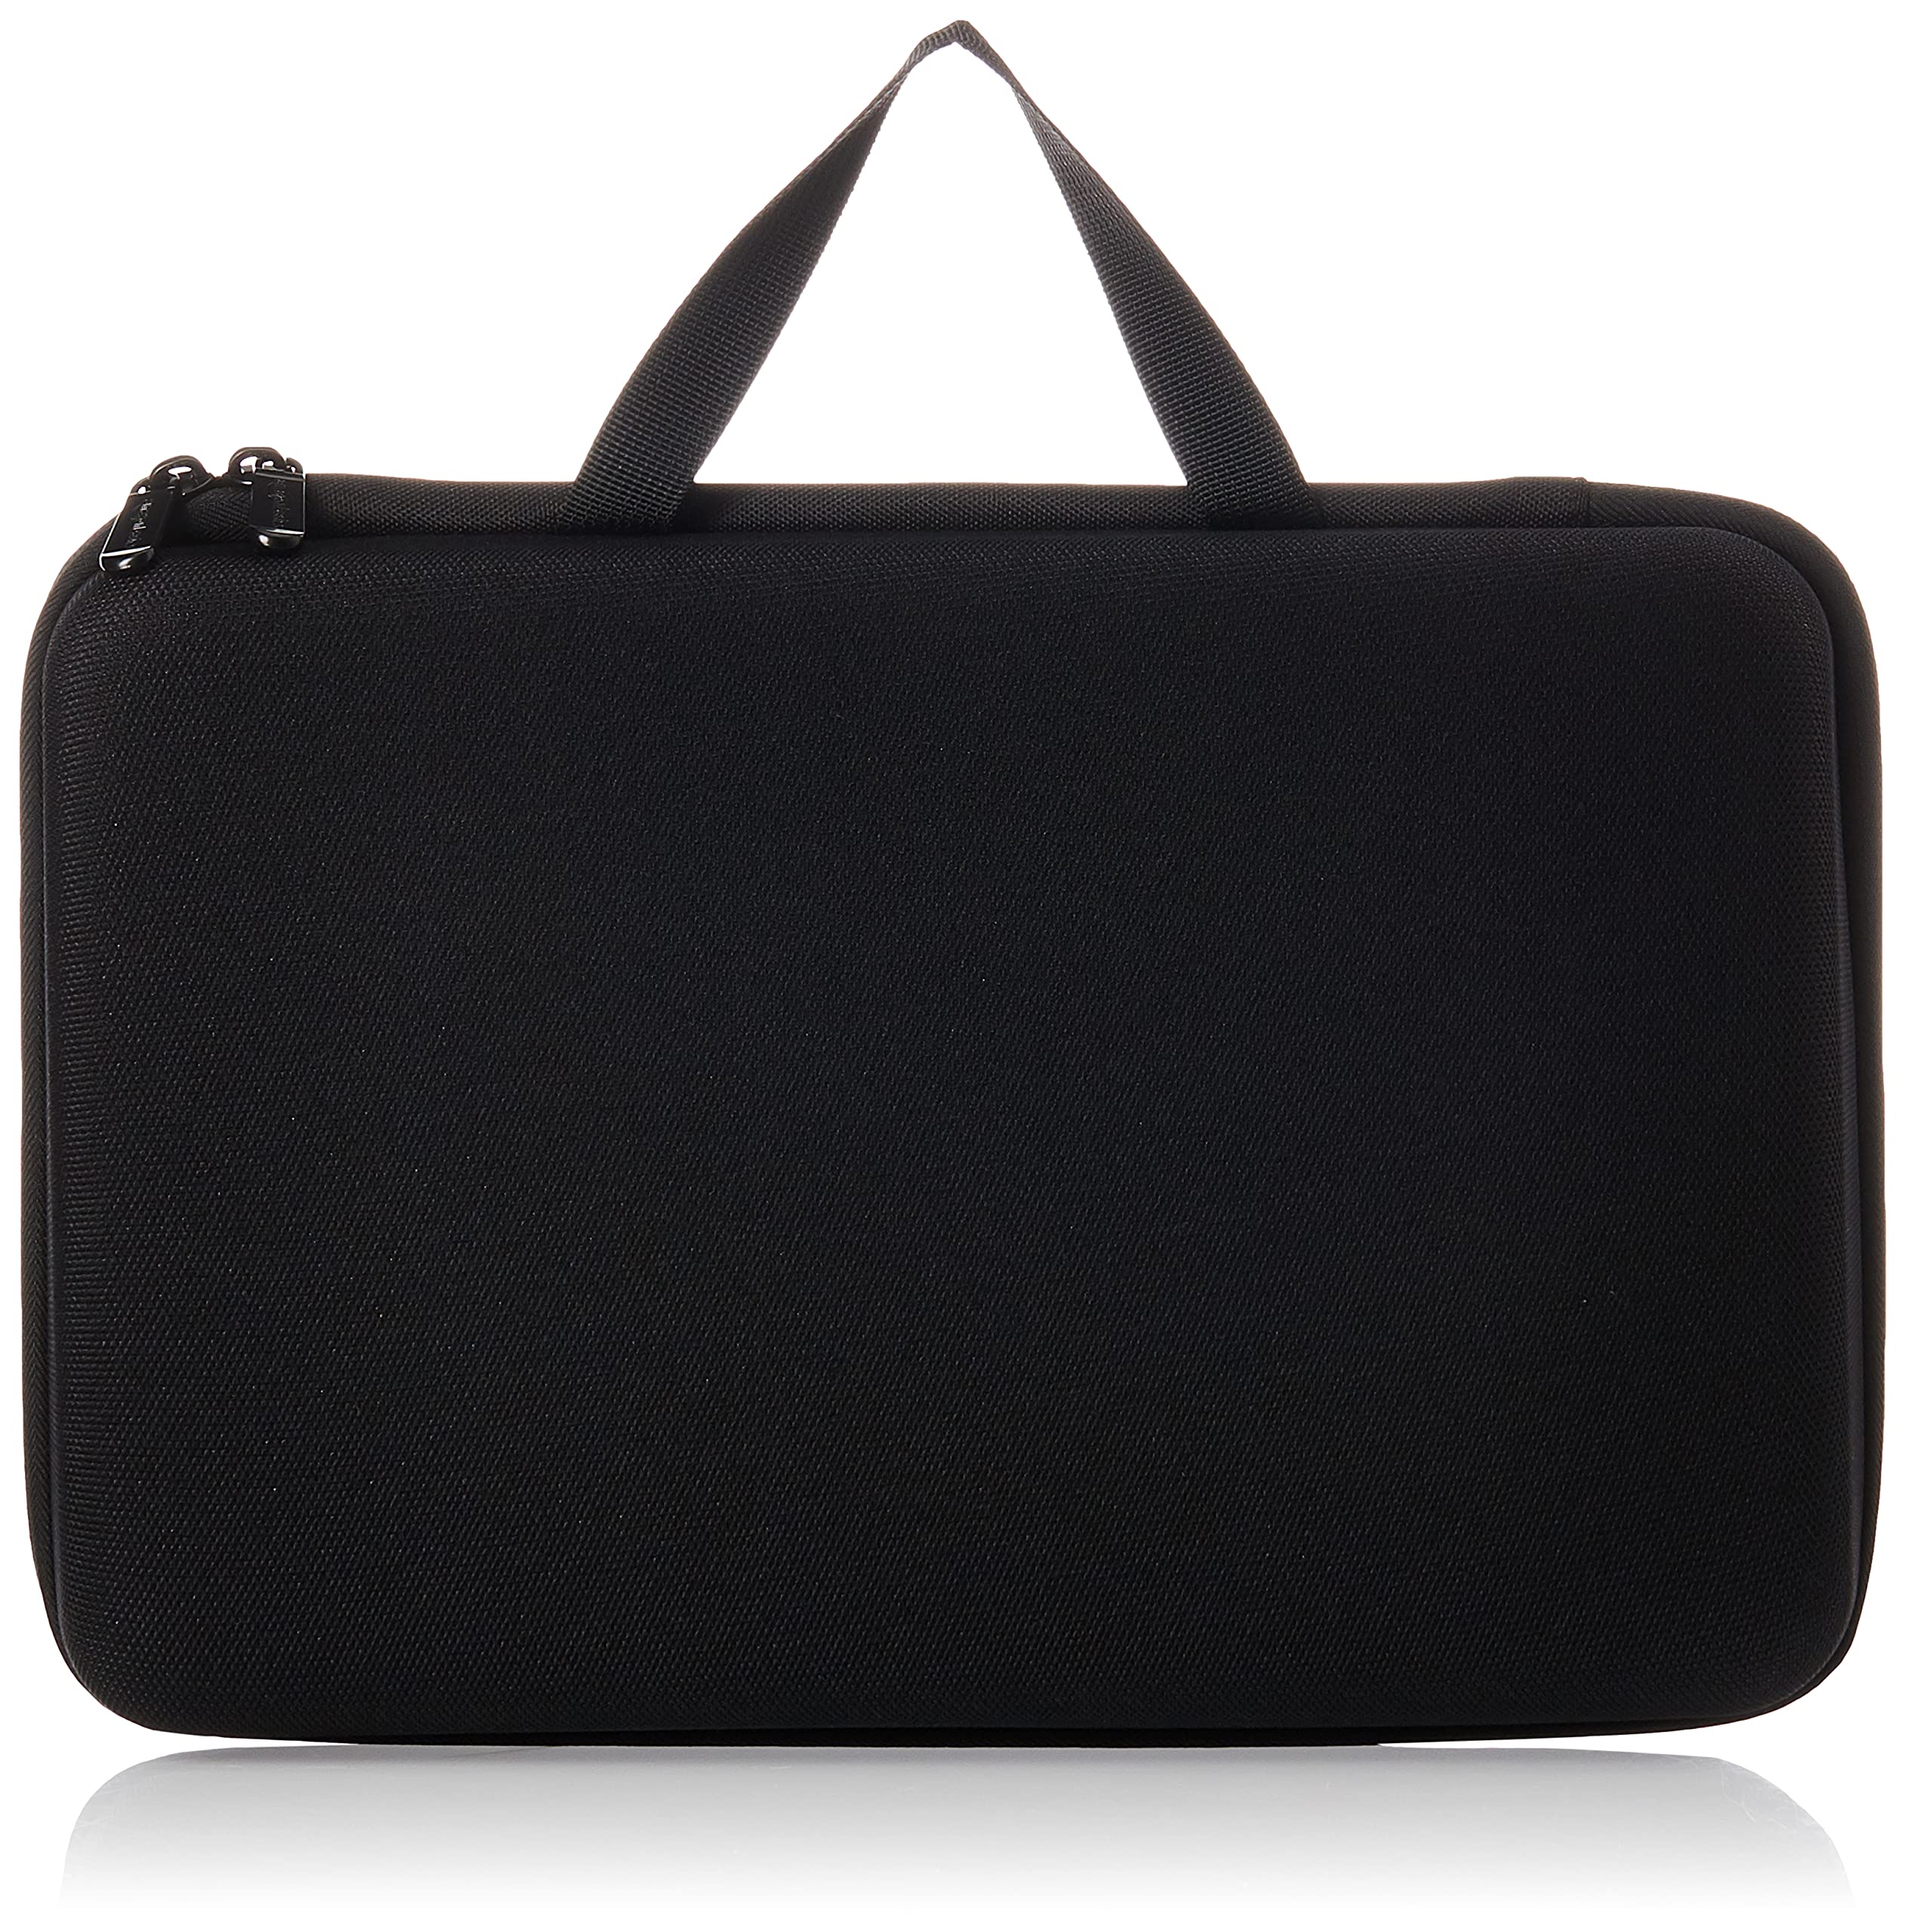 Amazon Basics Large Carrying Case for GoPro & Accessories (Black) $4.58 + Free Shipping w/ Prime or on $35+